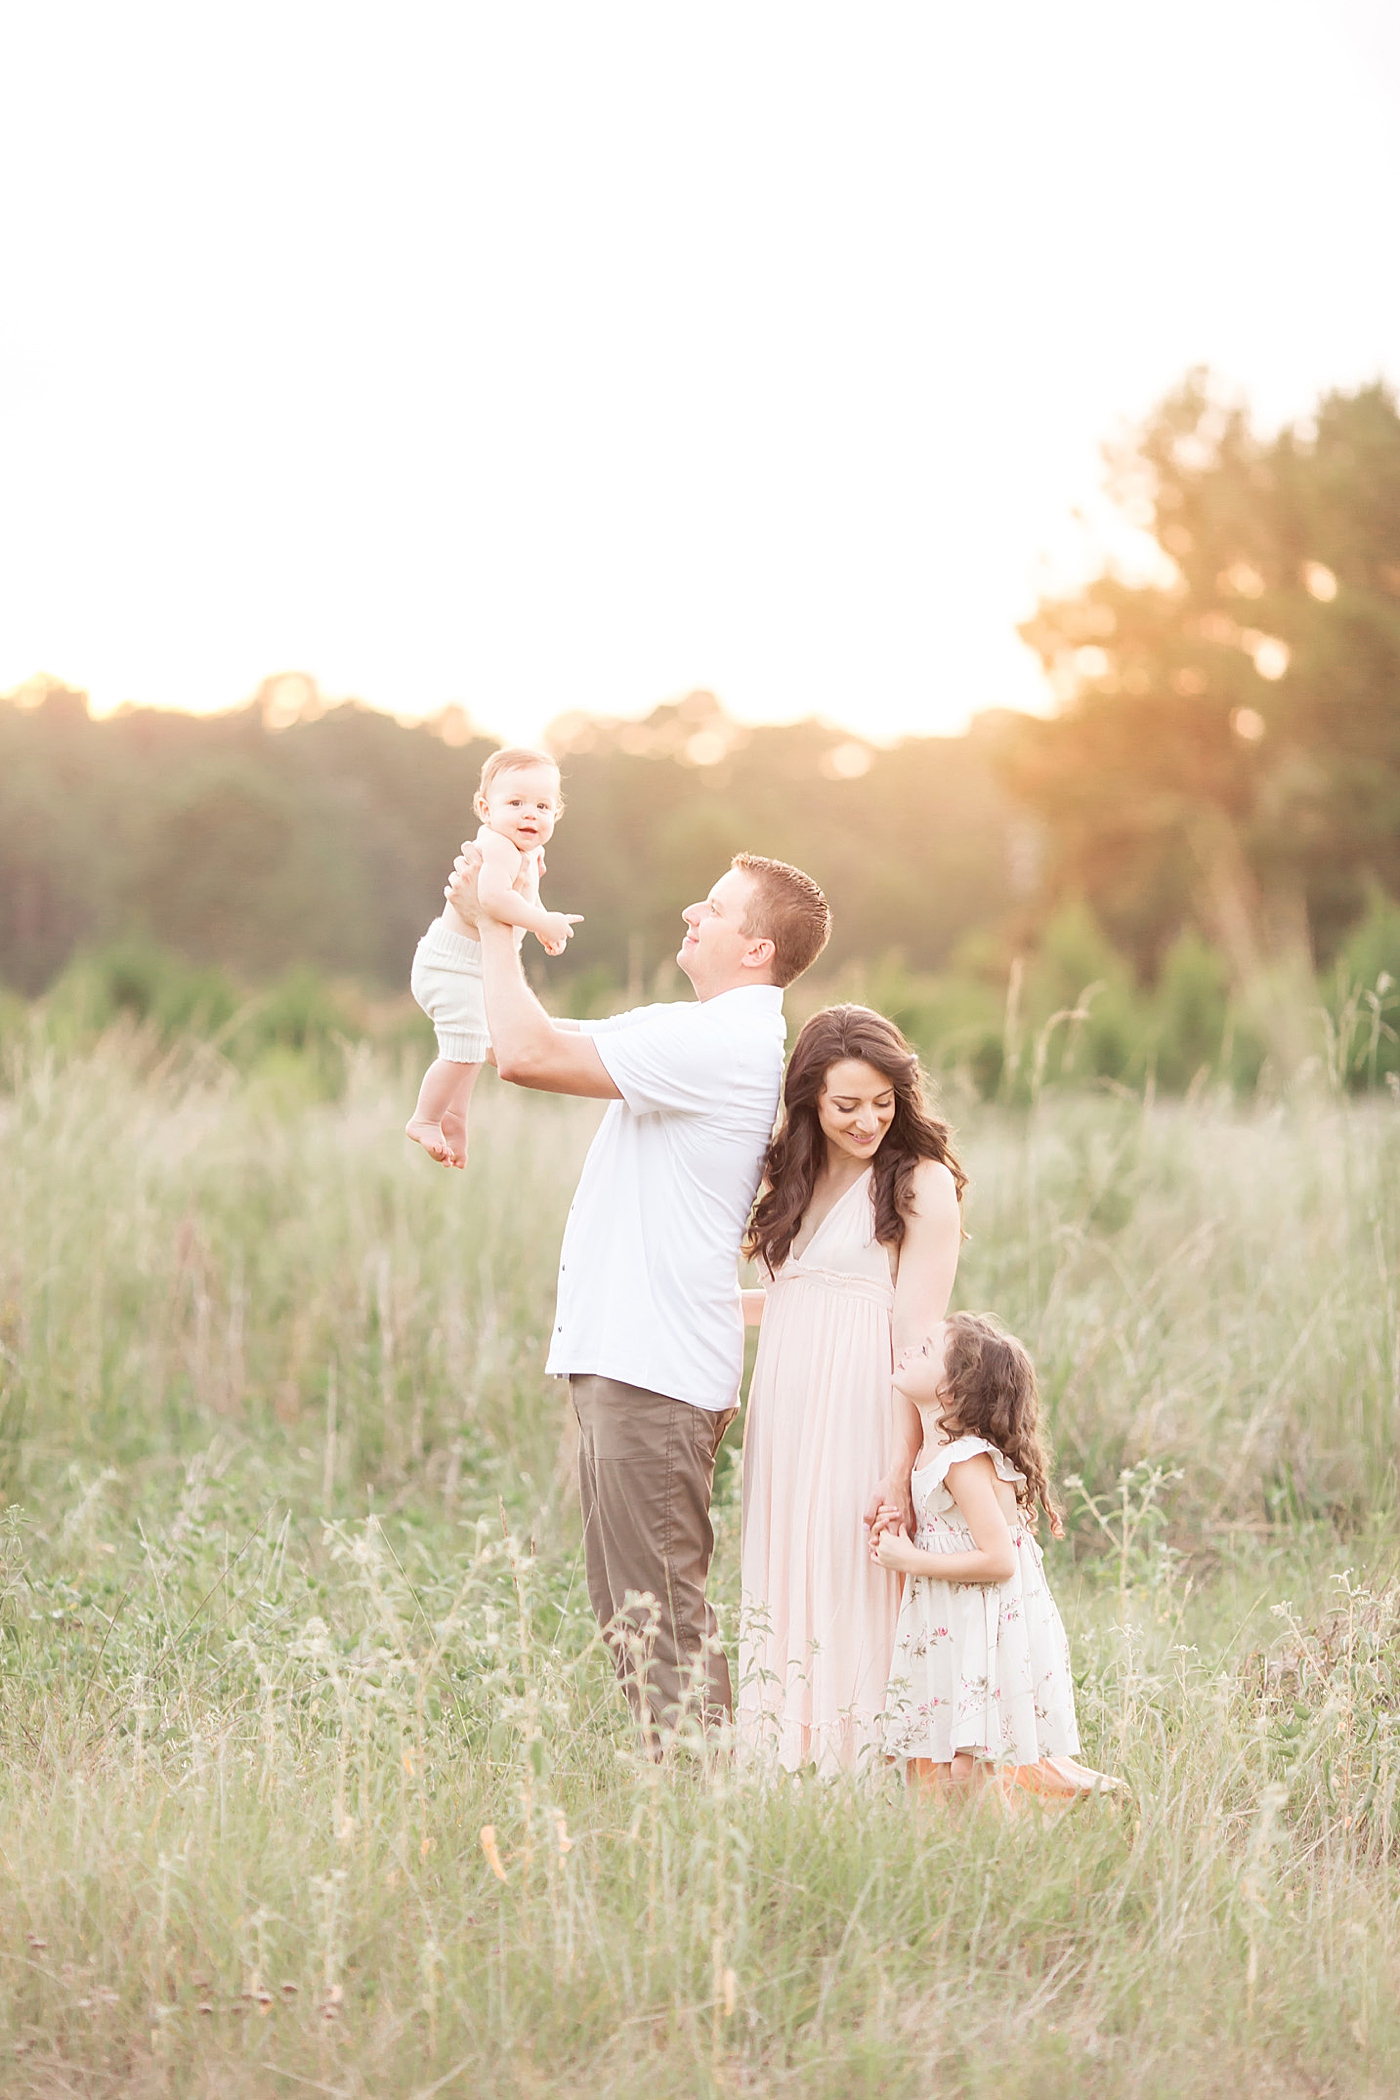 Outdoor family session for baby's six month photoshoot with Fresh Light Photography.